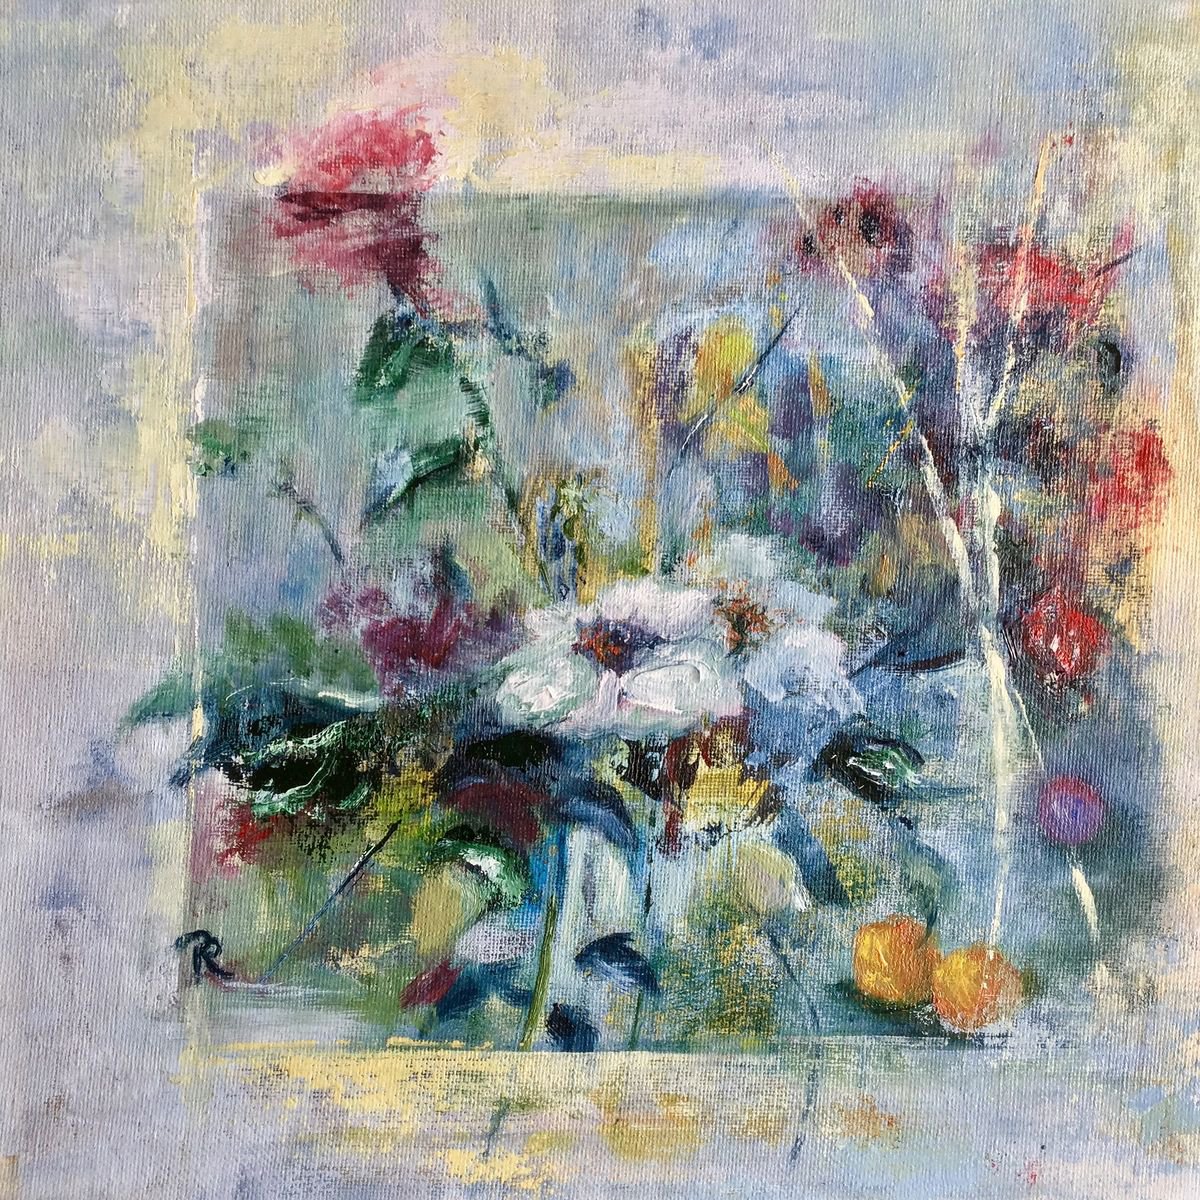 Untitled - with Flowers by Rebecca Pells